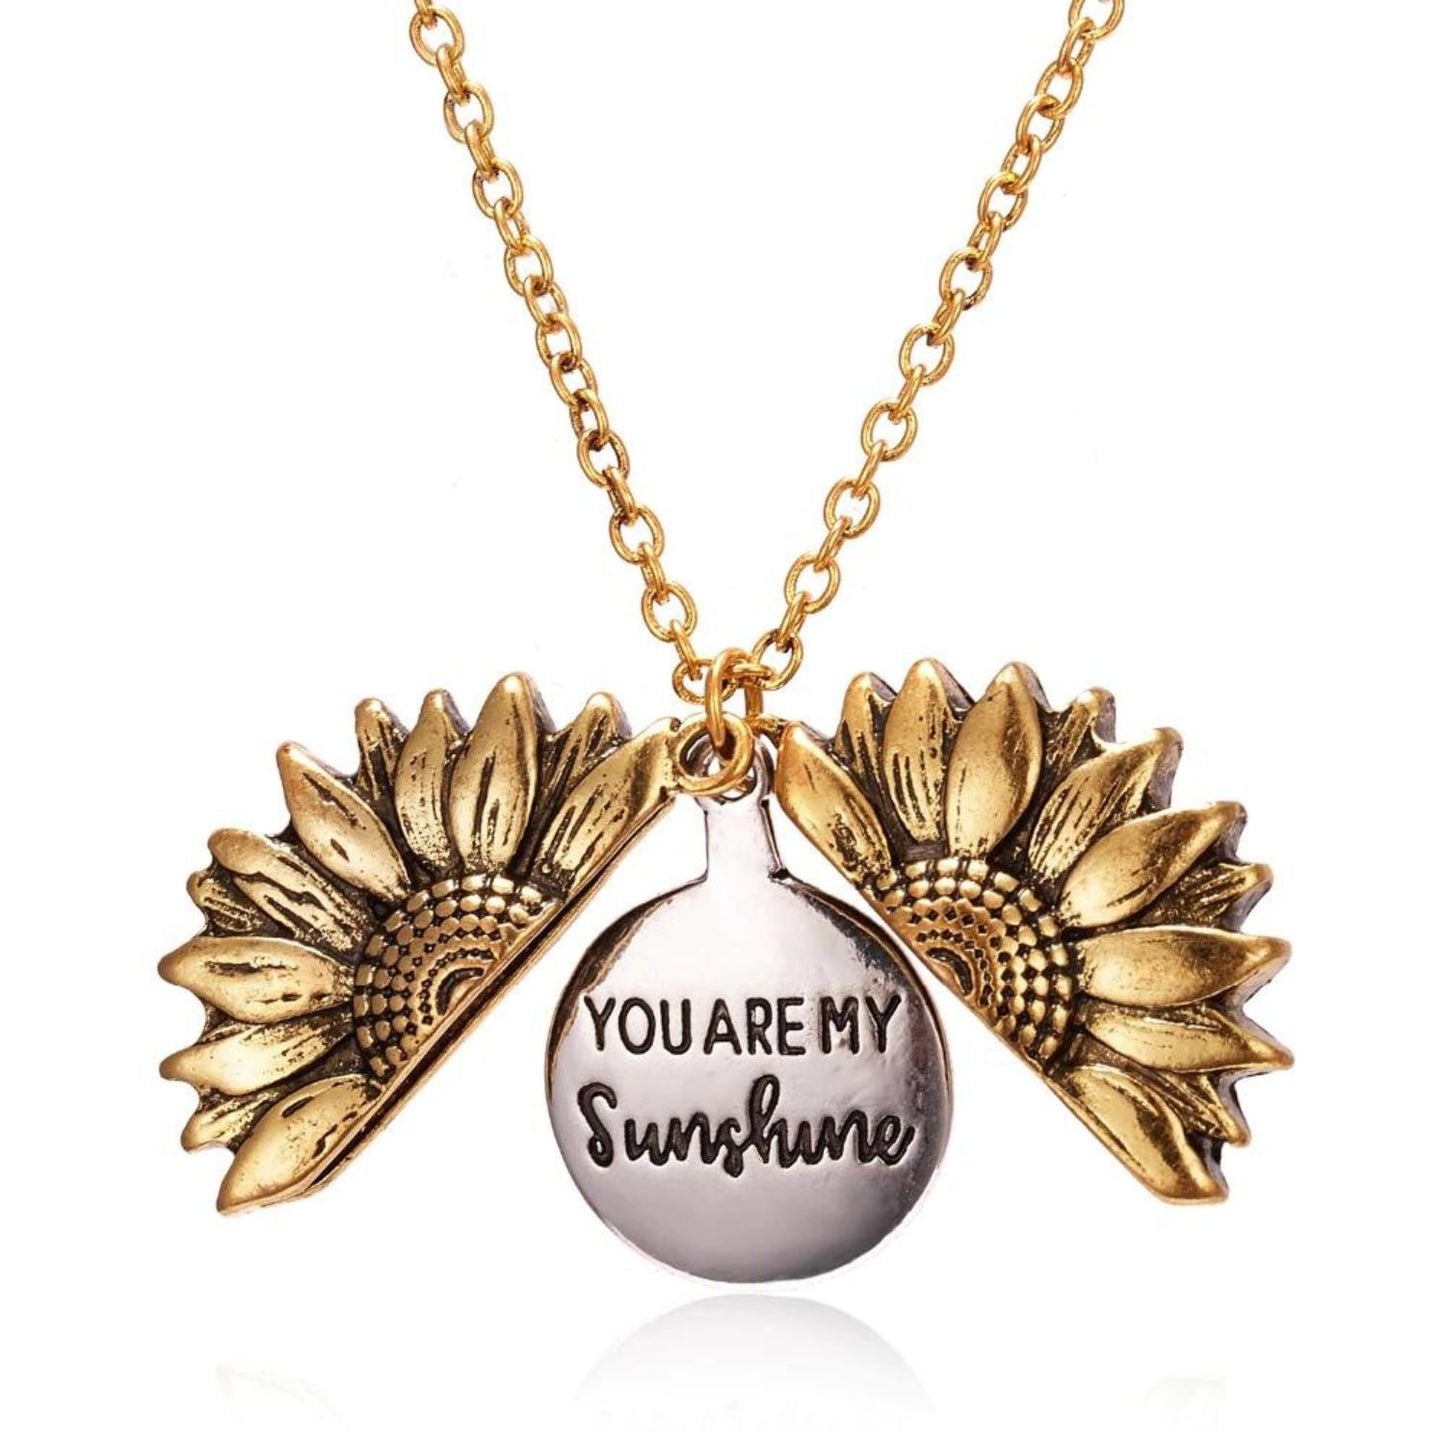 "You Are My Sunshine" Necklace - To My Sunshine